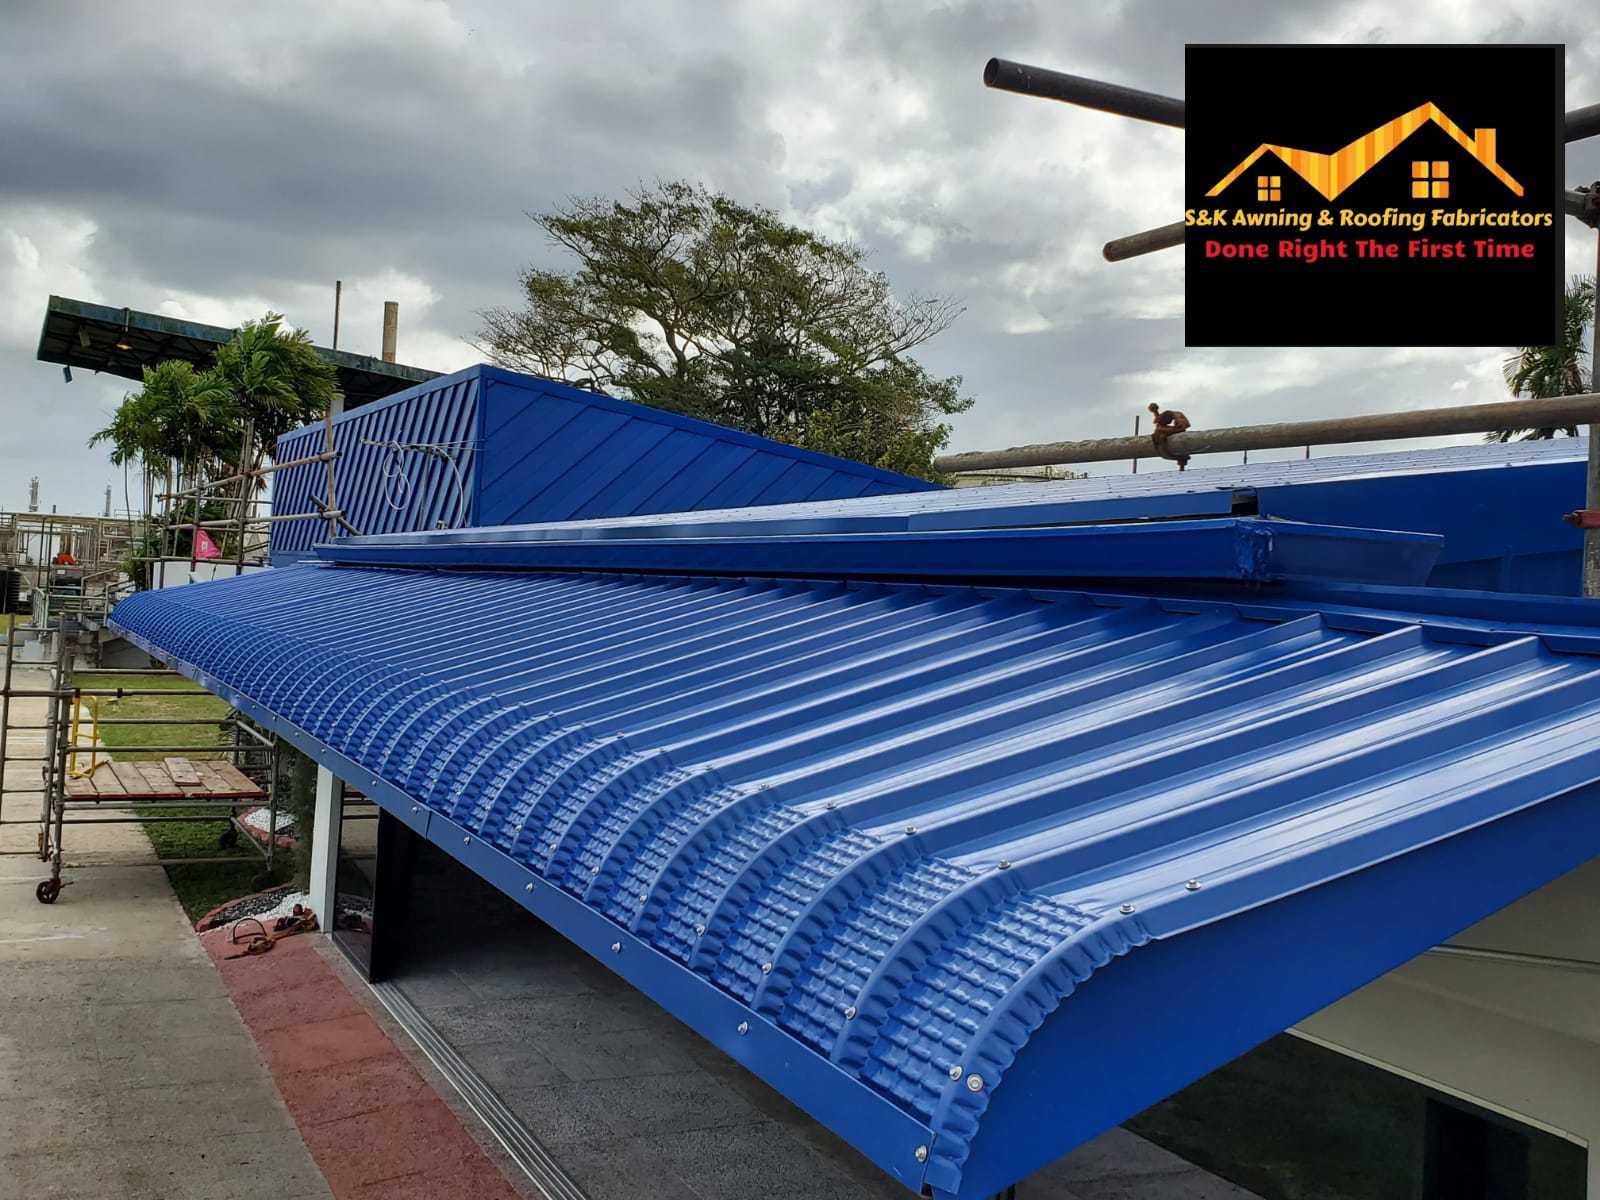 S & K Awning & Roofing Fabricators - ROOFING CONTRACTORS